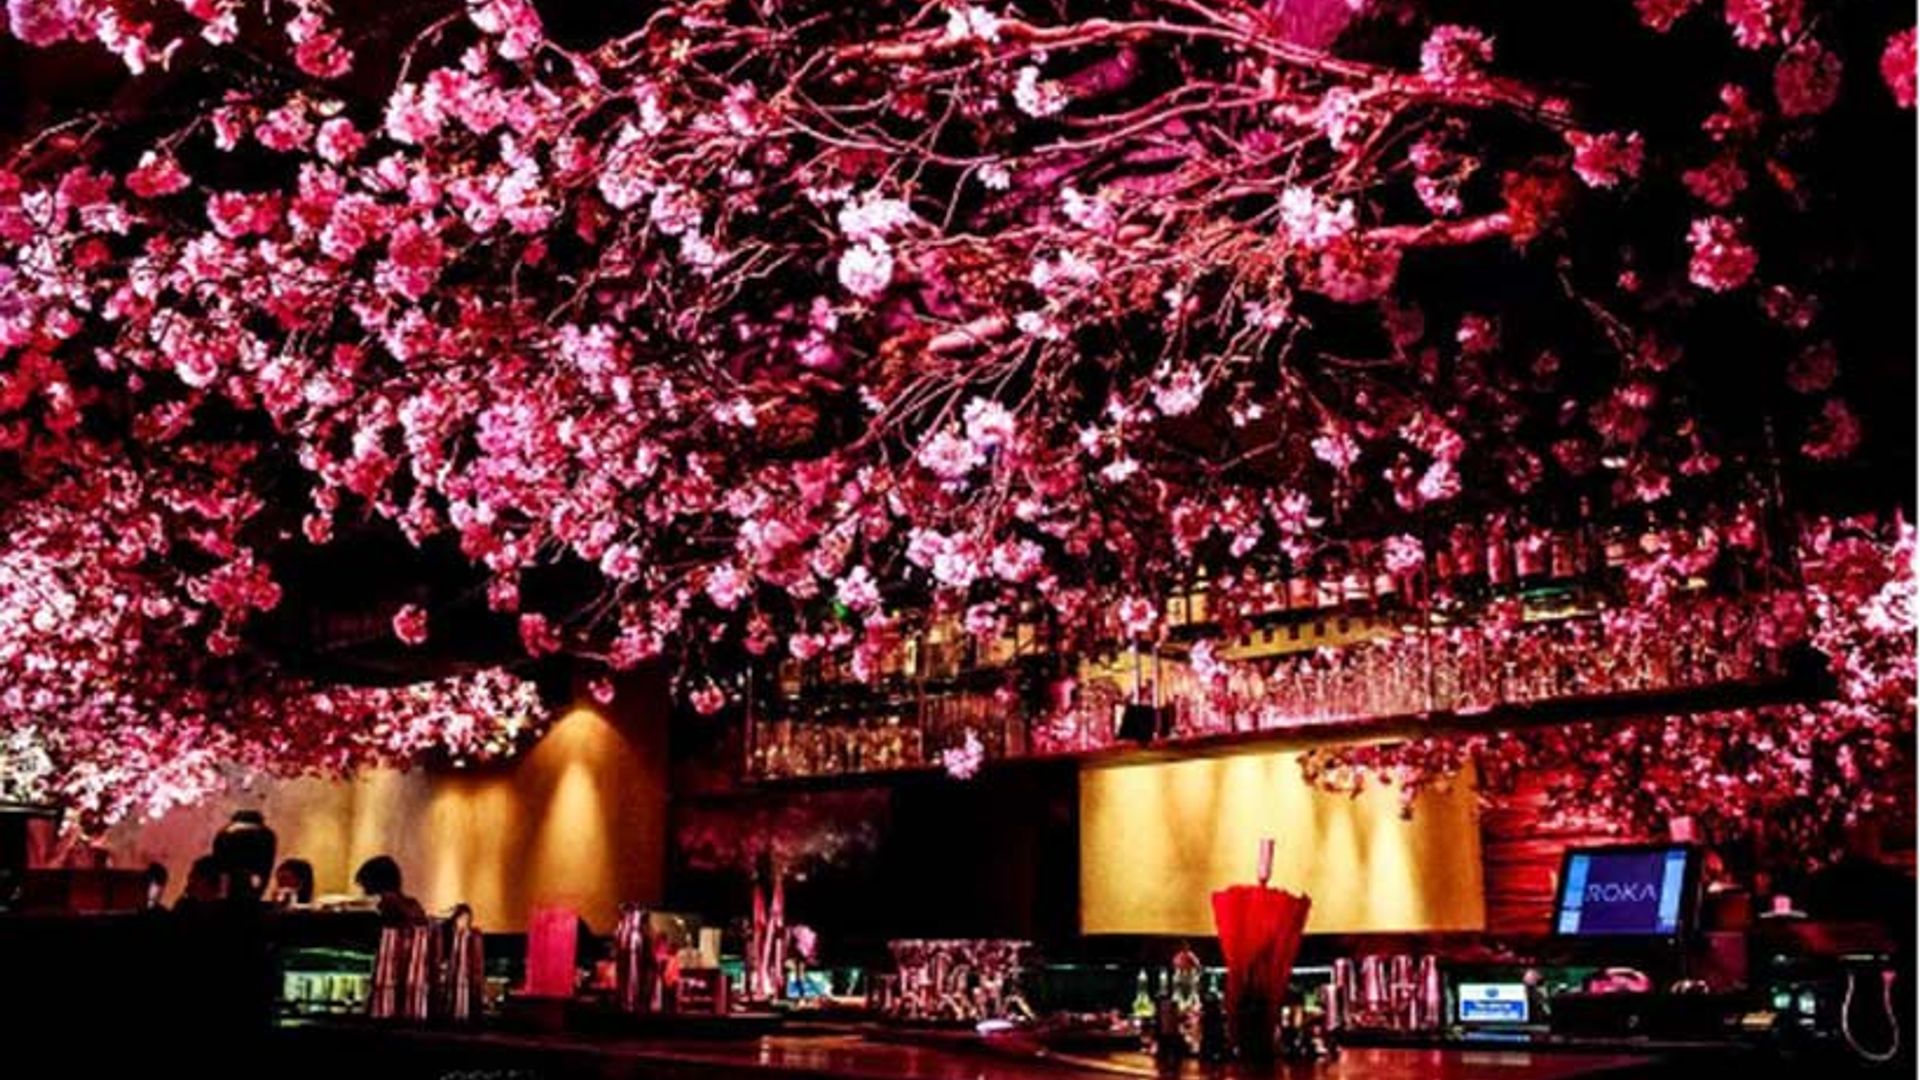 This Japanese restaurant has taken the cherry blossom craze to the next level